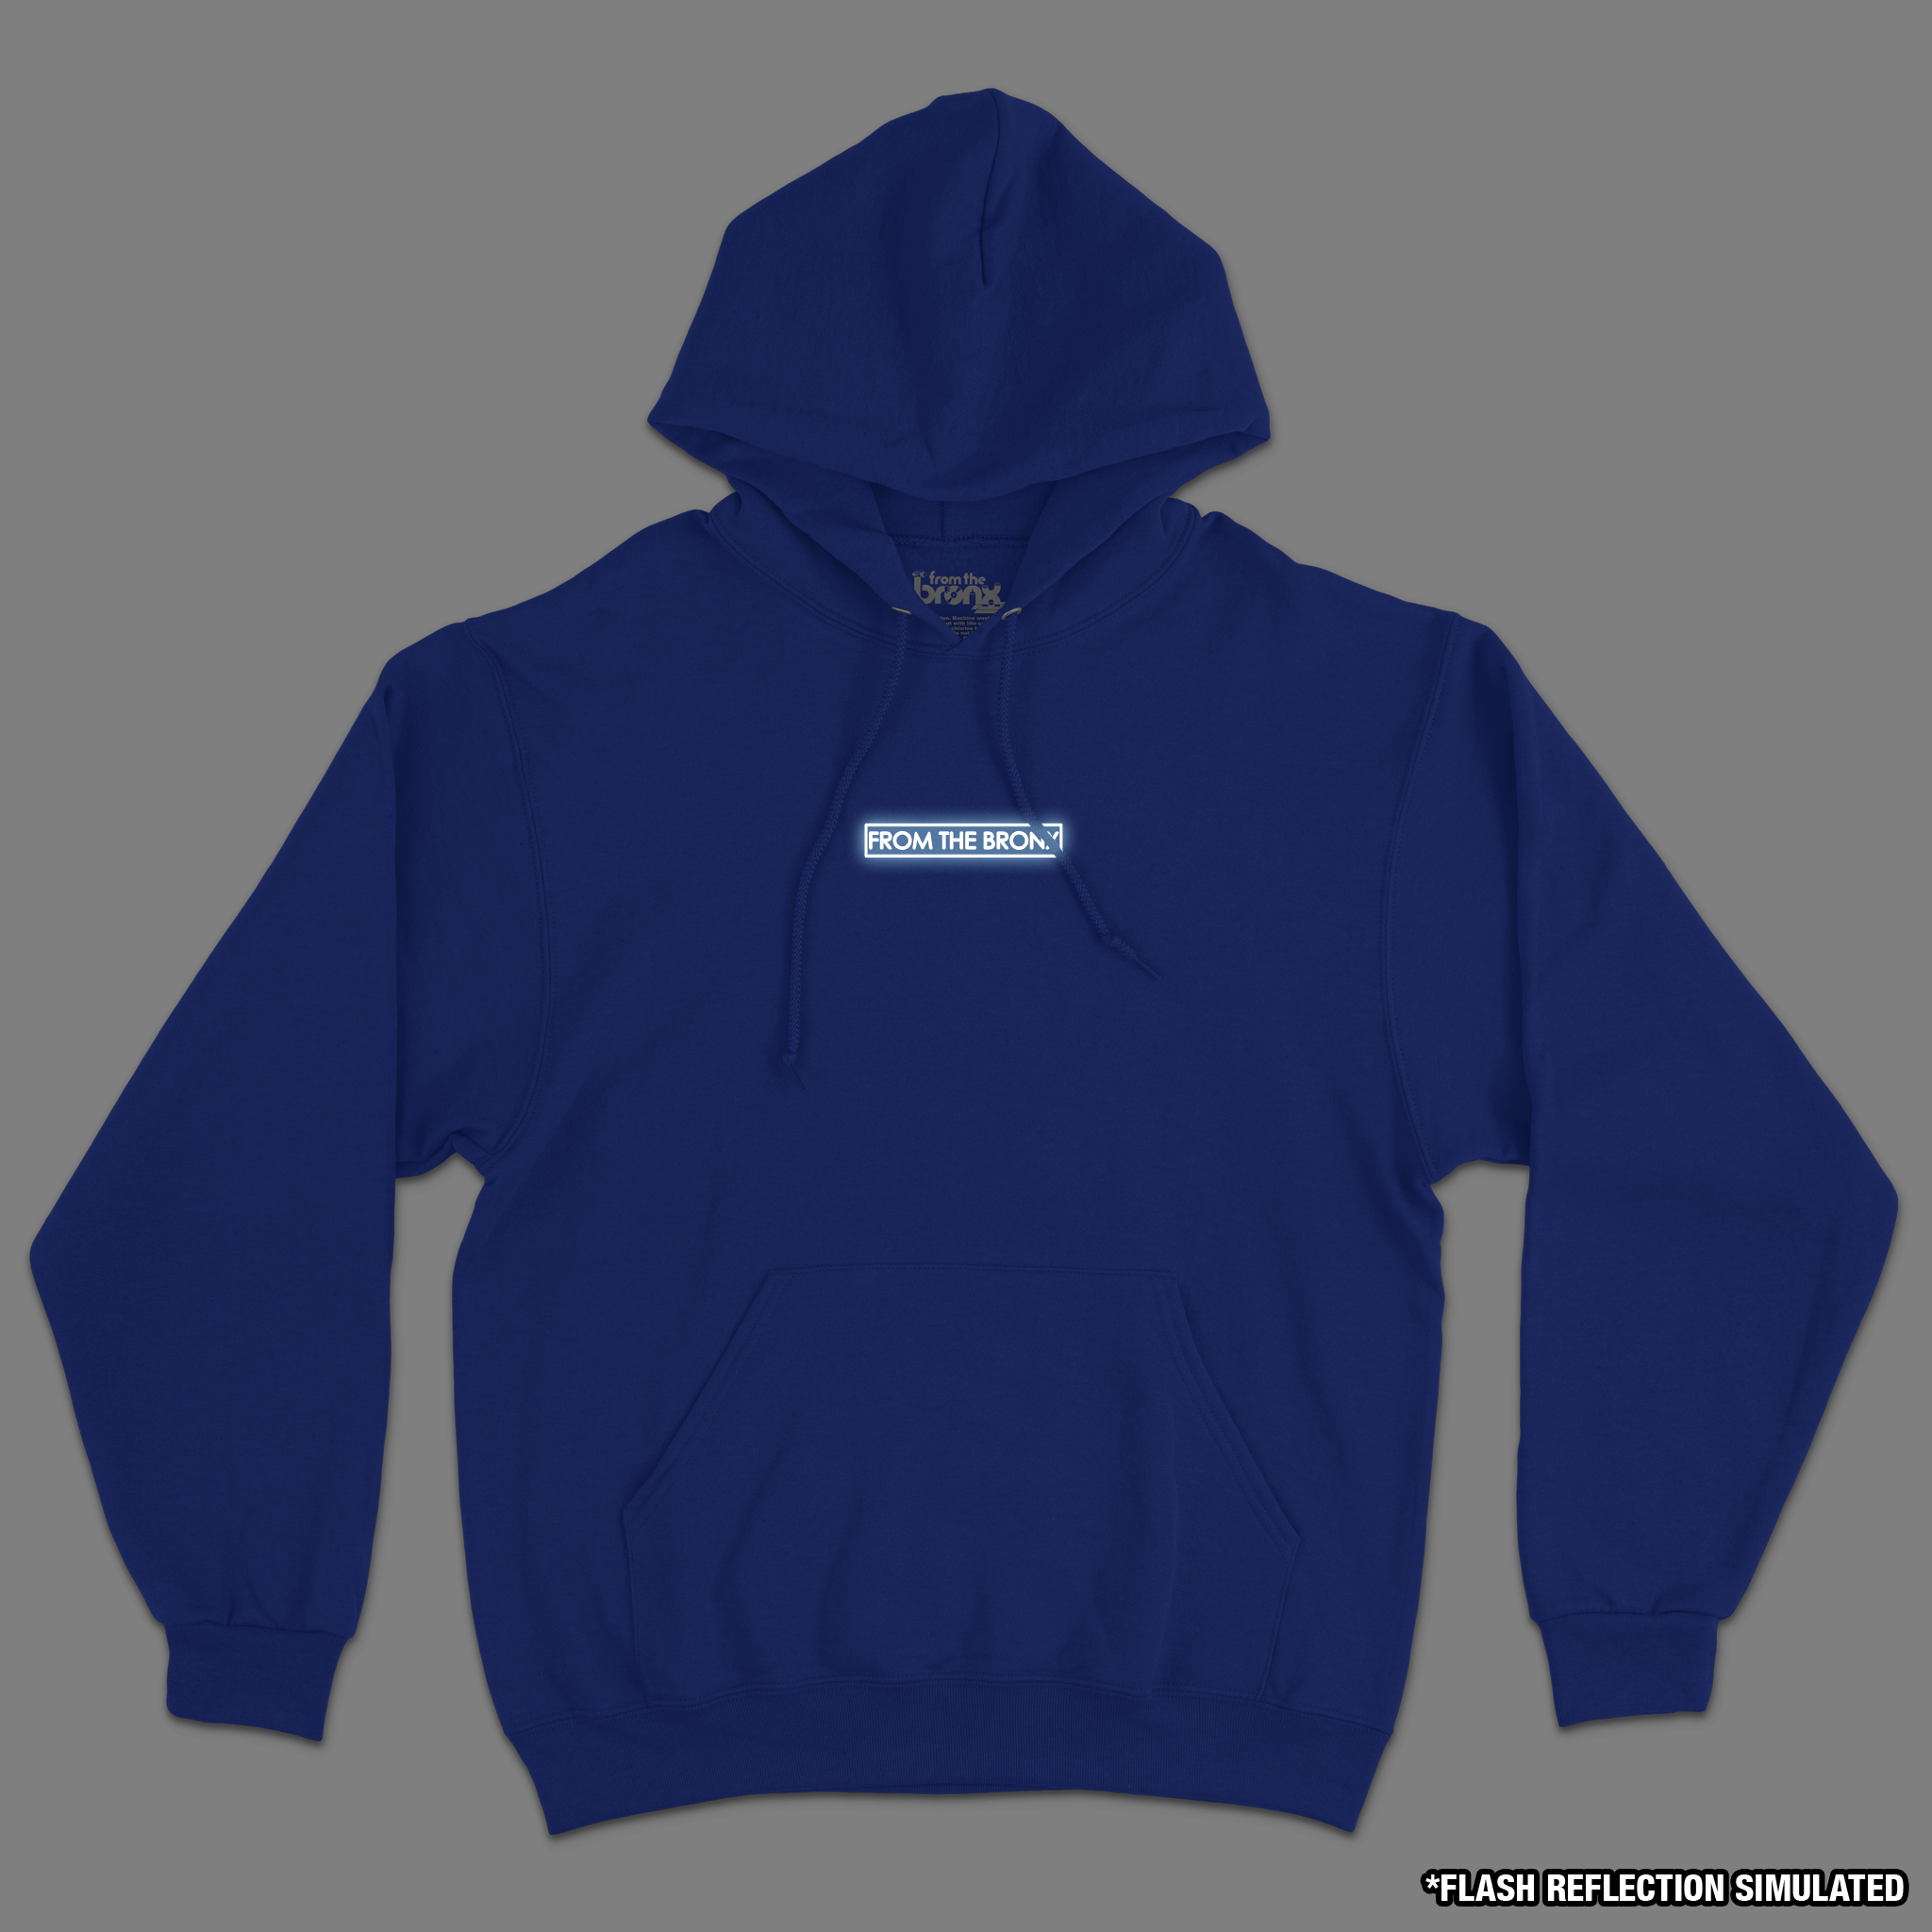 Boogie Down Bronx Reflective Mid Weight Pullover Hoodie Front in Royal Blue with Simulated Flash